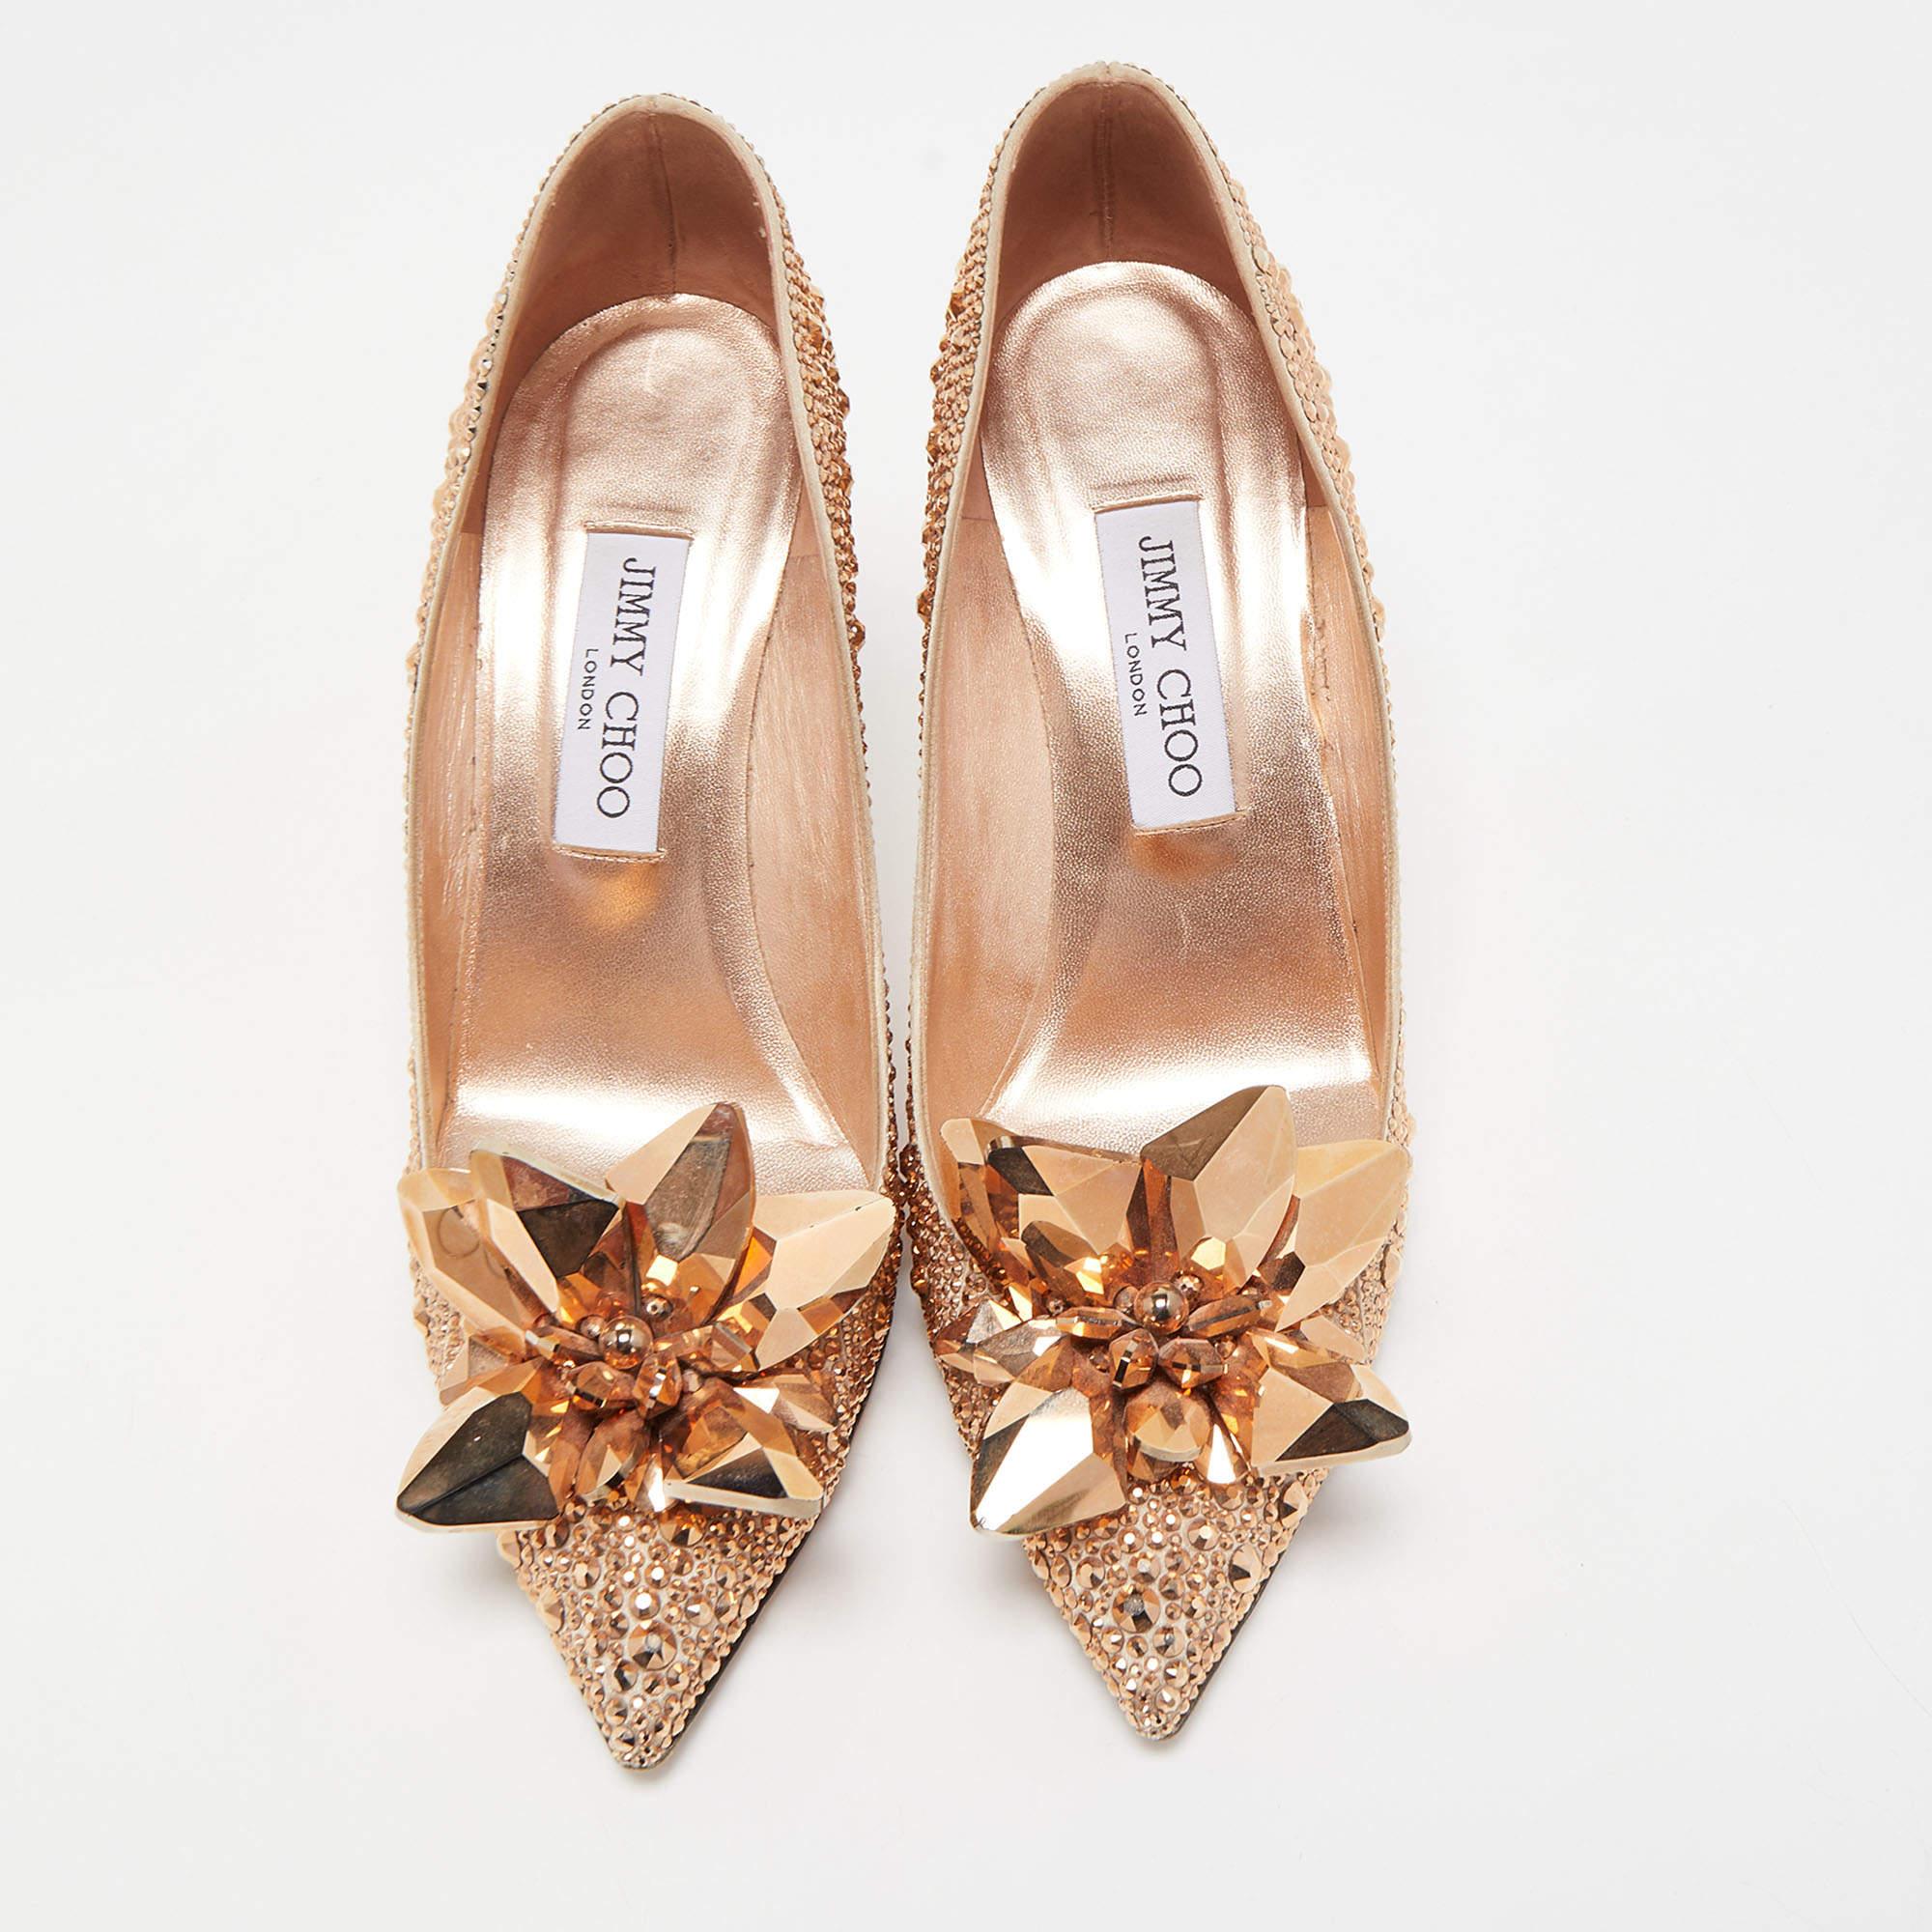 Deliver the most unforgettable looks with these pumps from Jimmy Choo! From their shape and detailing to their overall appeal, they are utterly mesmerizing. The pumps are crafted from crystals and satin. They are complete with comfortable insoles